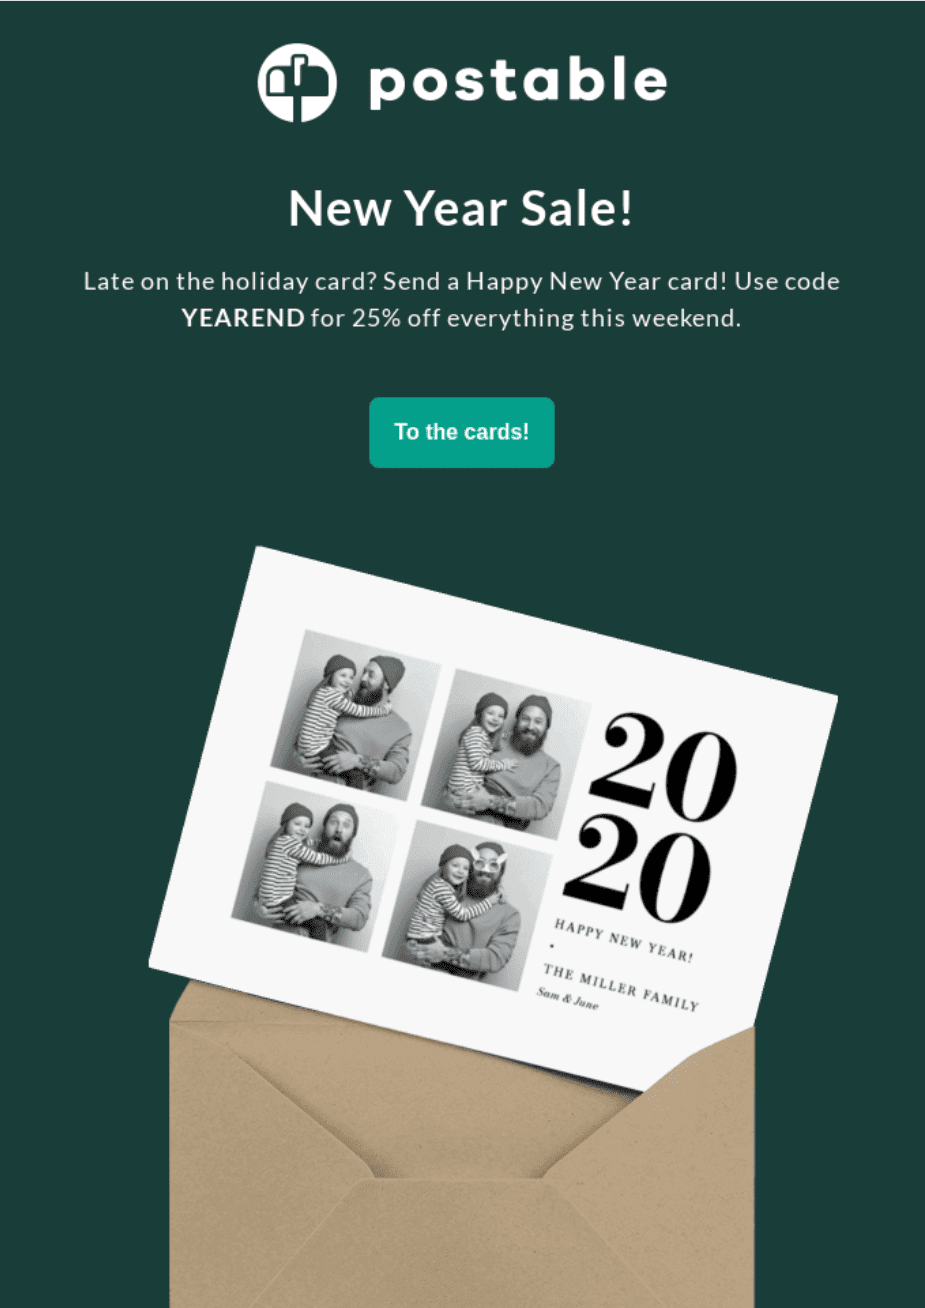 New Year Coupons in Emails